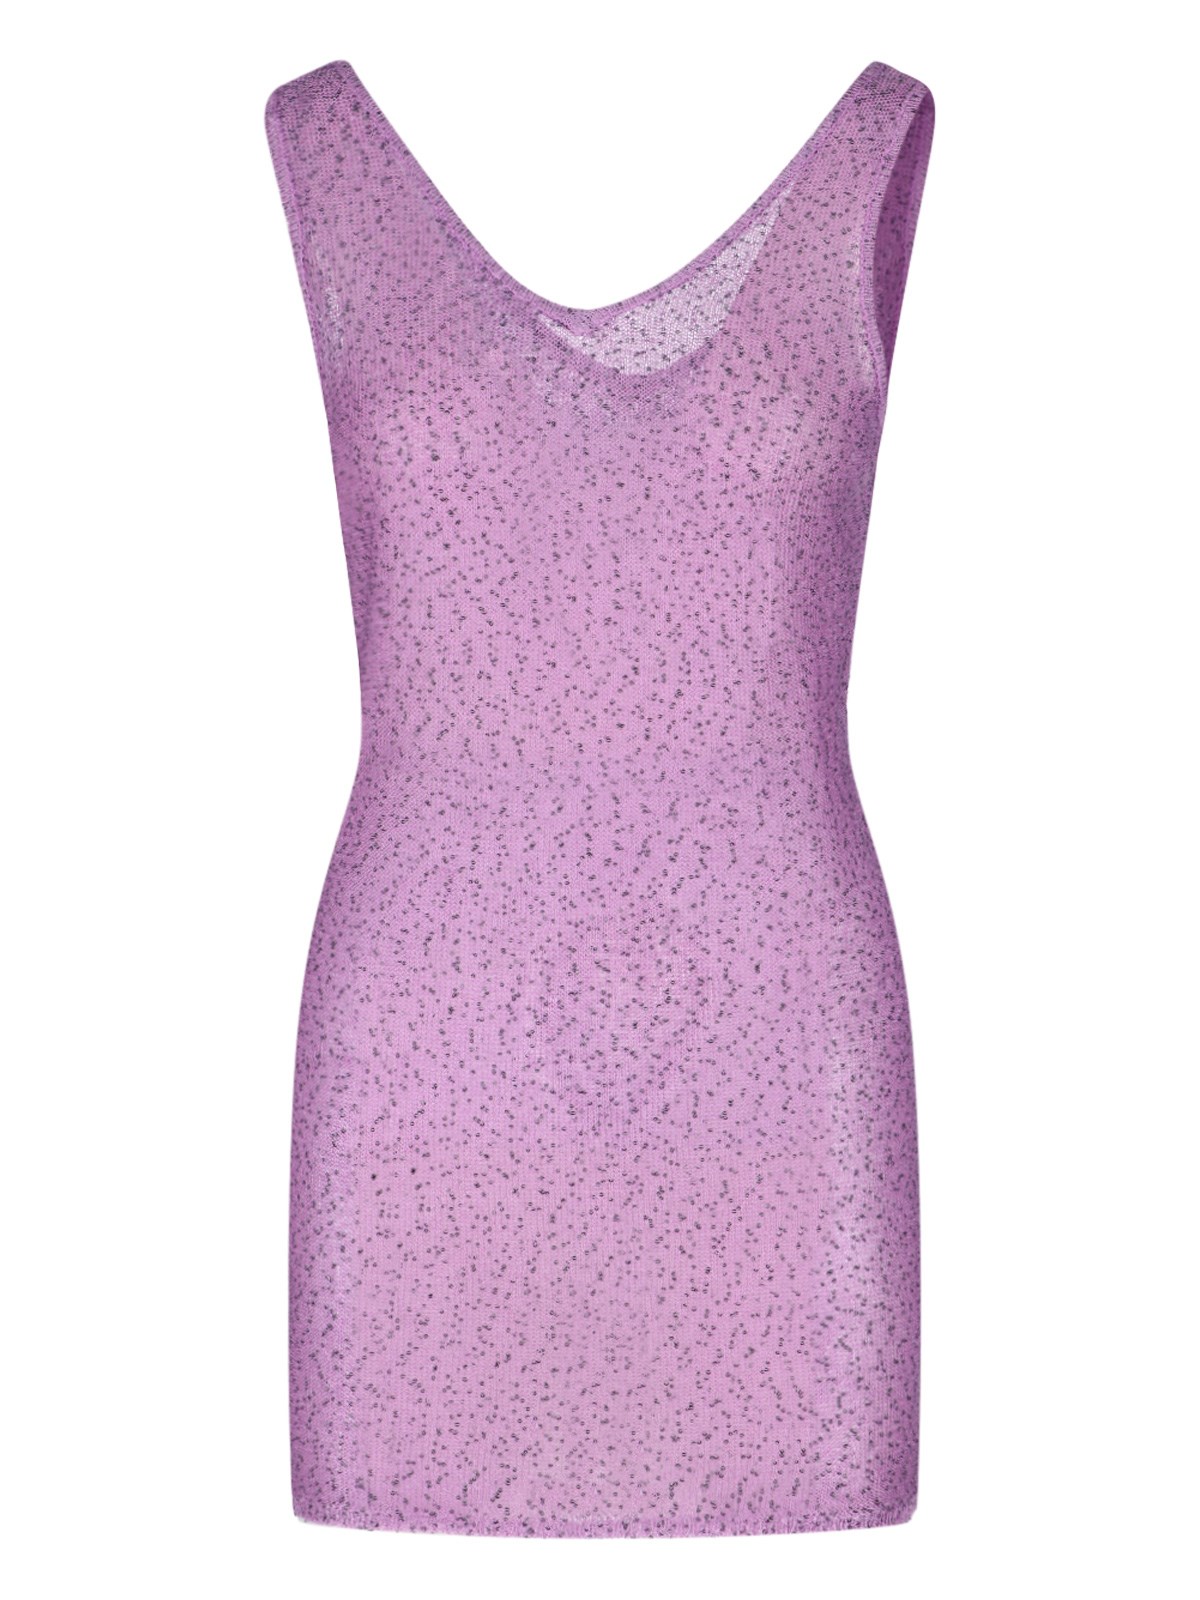 Remain Sequin Knit Top In Viola